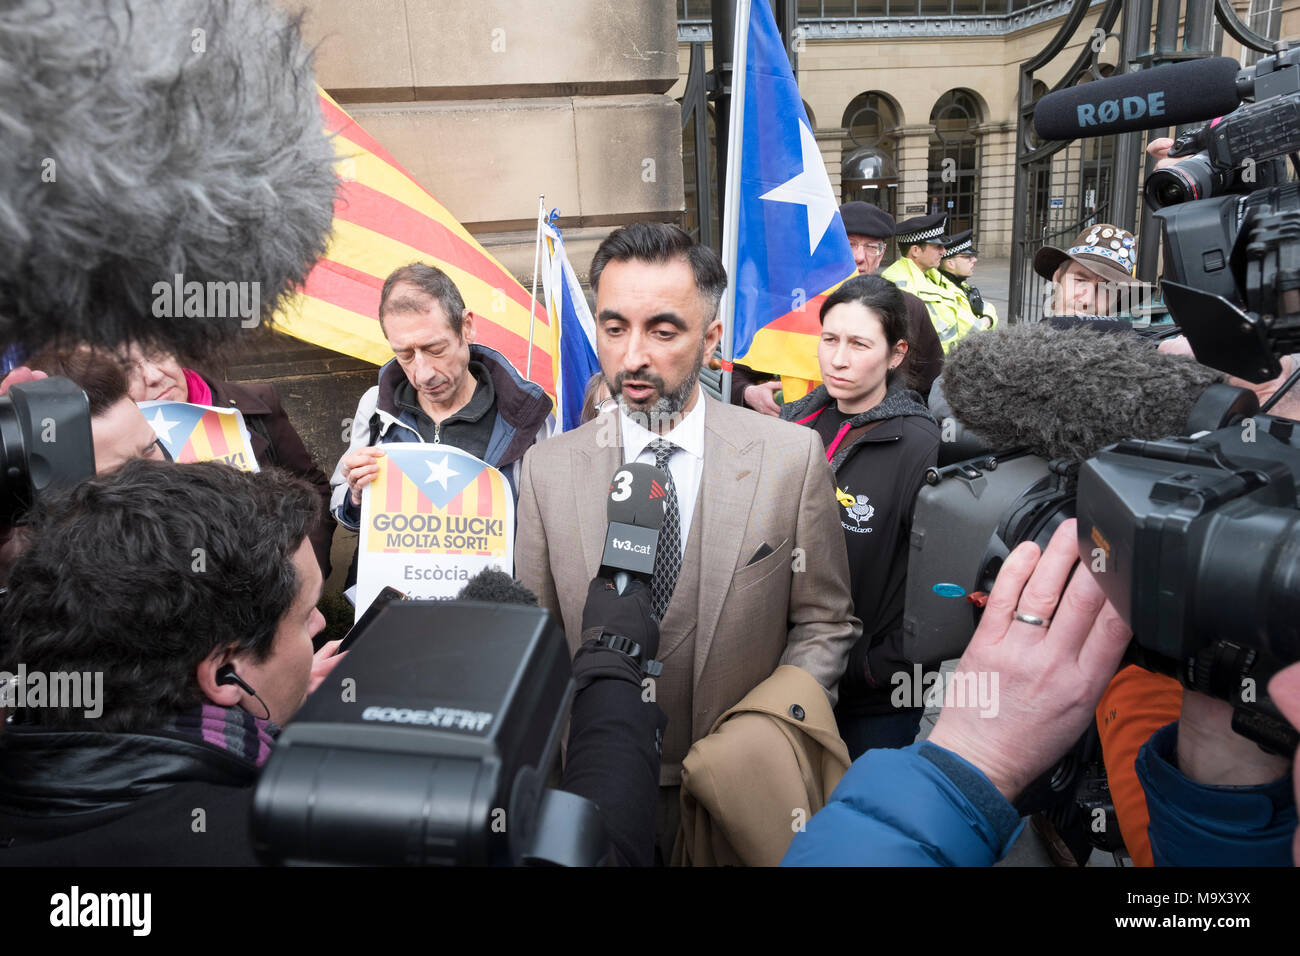 Edinburgh, Scotland,UK. 28 March 2018. Aamer Anwar lawyer of former Catalonia Education Minister and independence supporter Clara Ponsati outside Edinburgh Sheriff Court ahead of her bail hearing. Ponsati faces extradition to Spain. She was granted bail. Credit: Iain Masterton/Alamy Live News Stock Photo